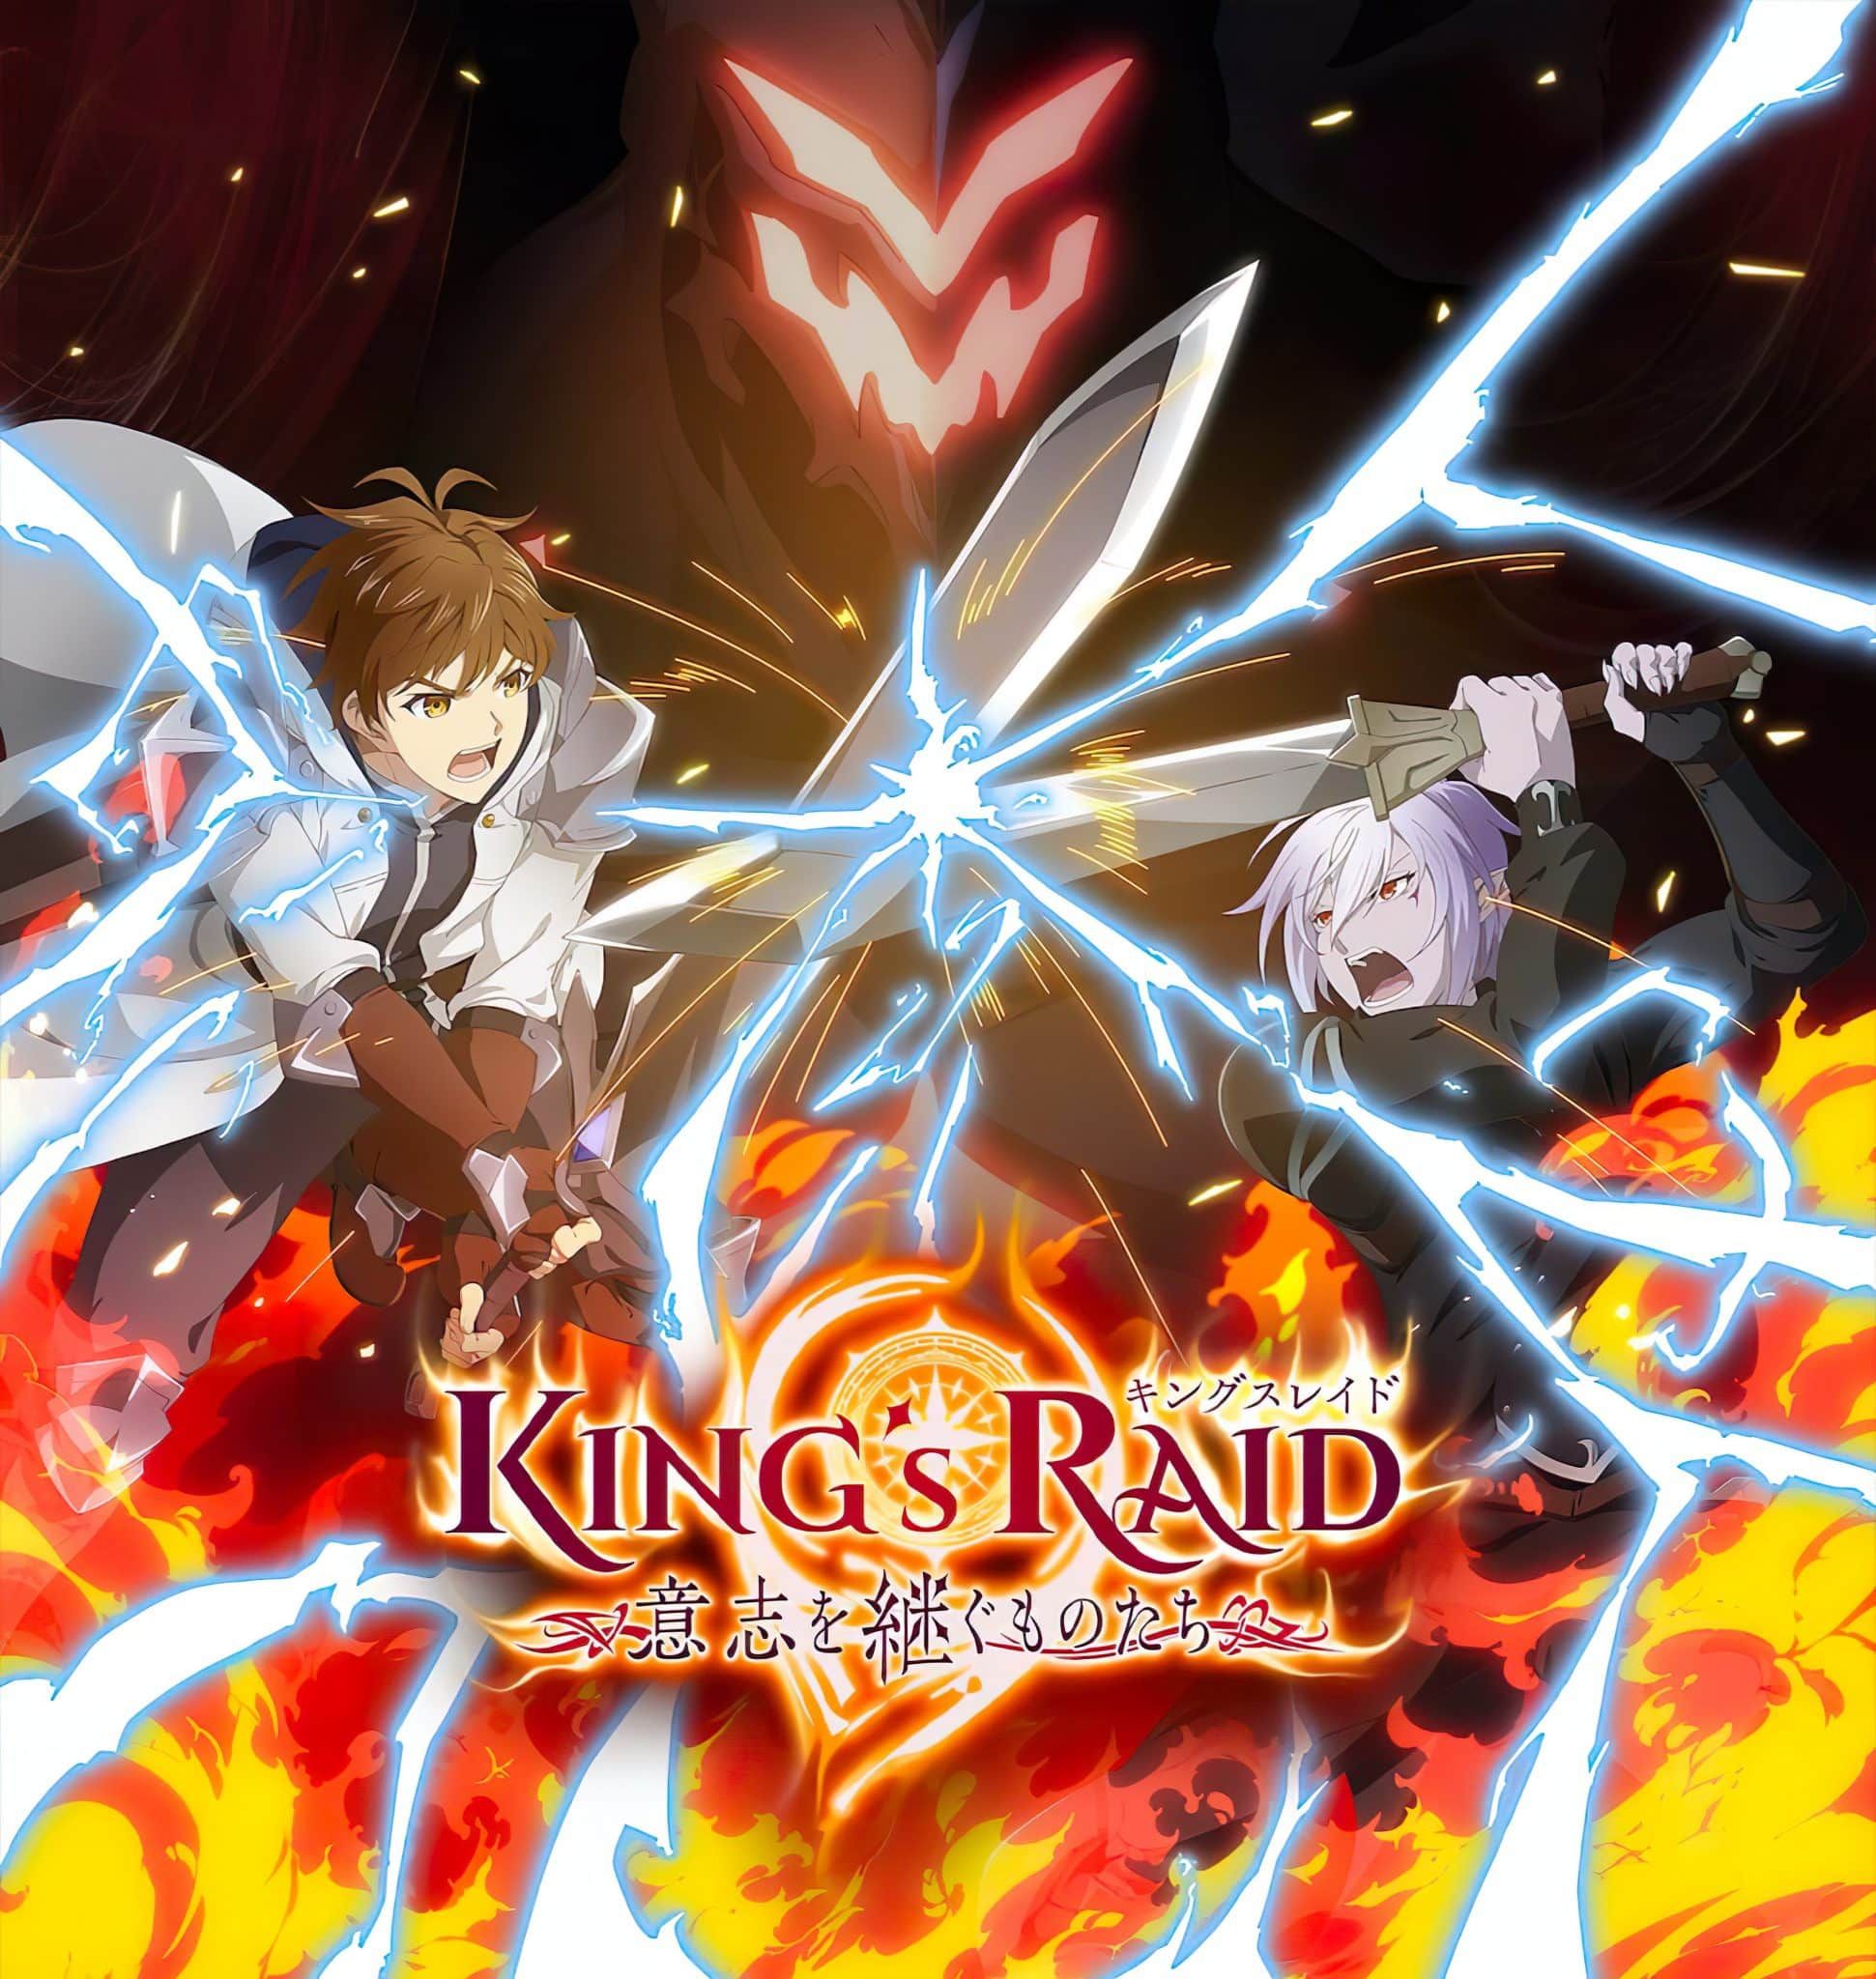 King's Raid - Successors of the Will - Anime